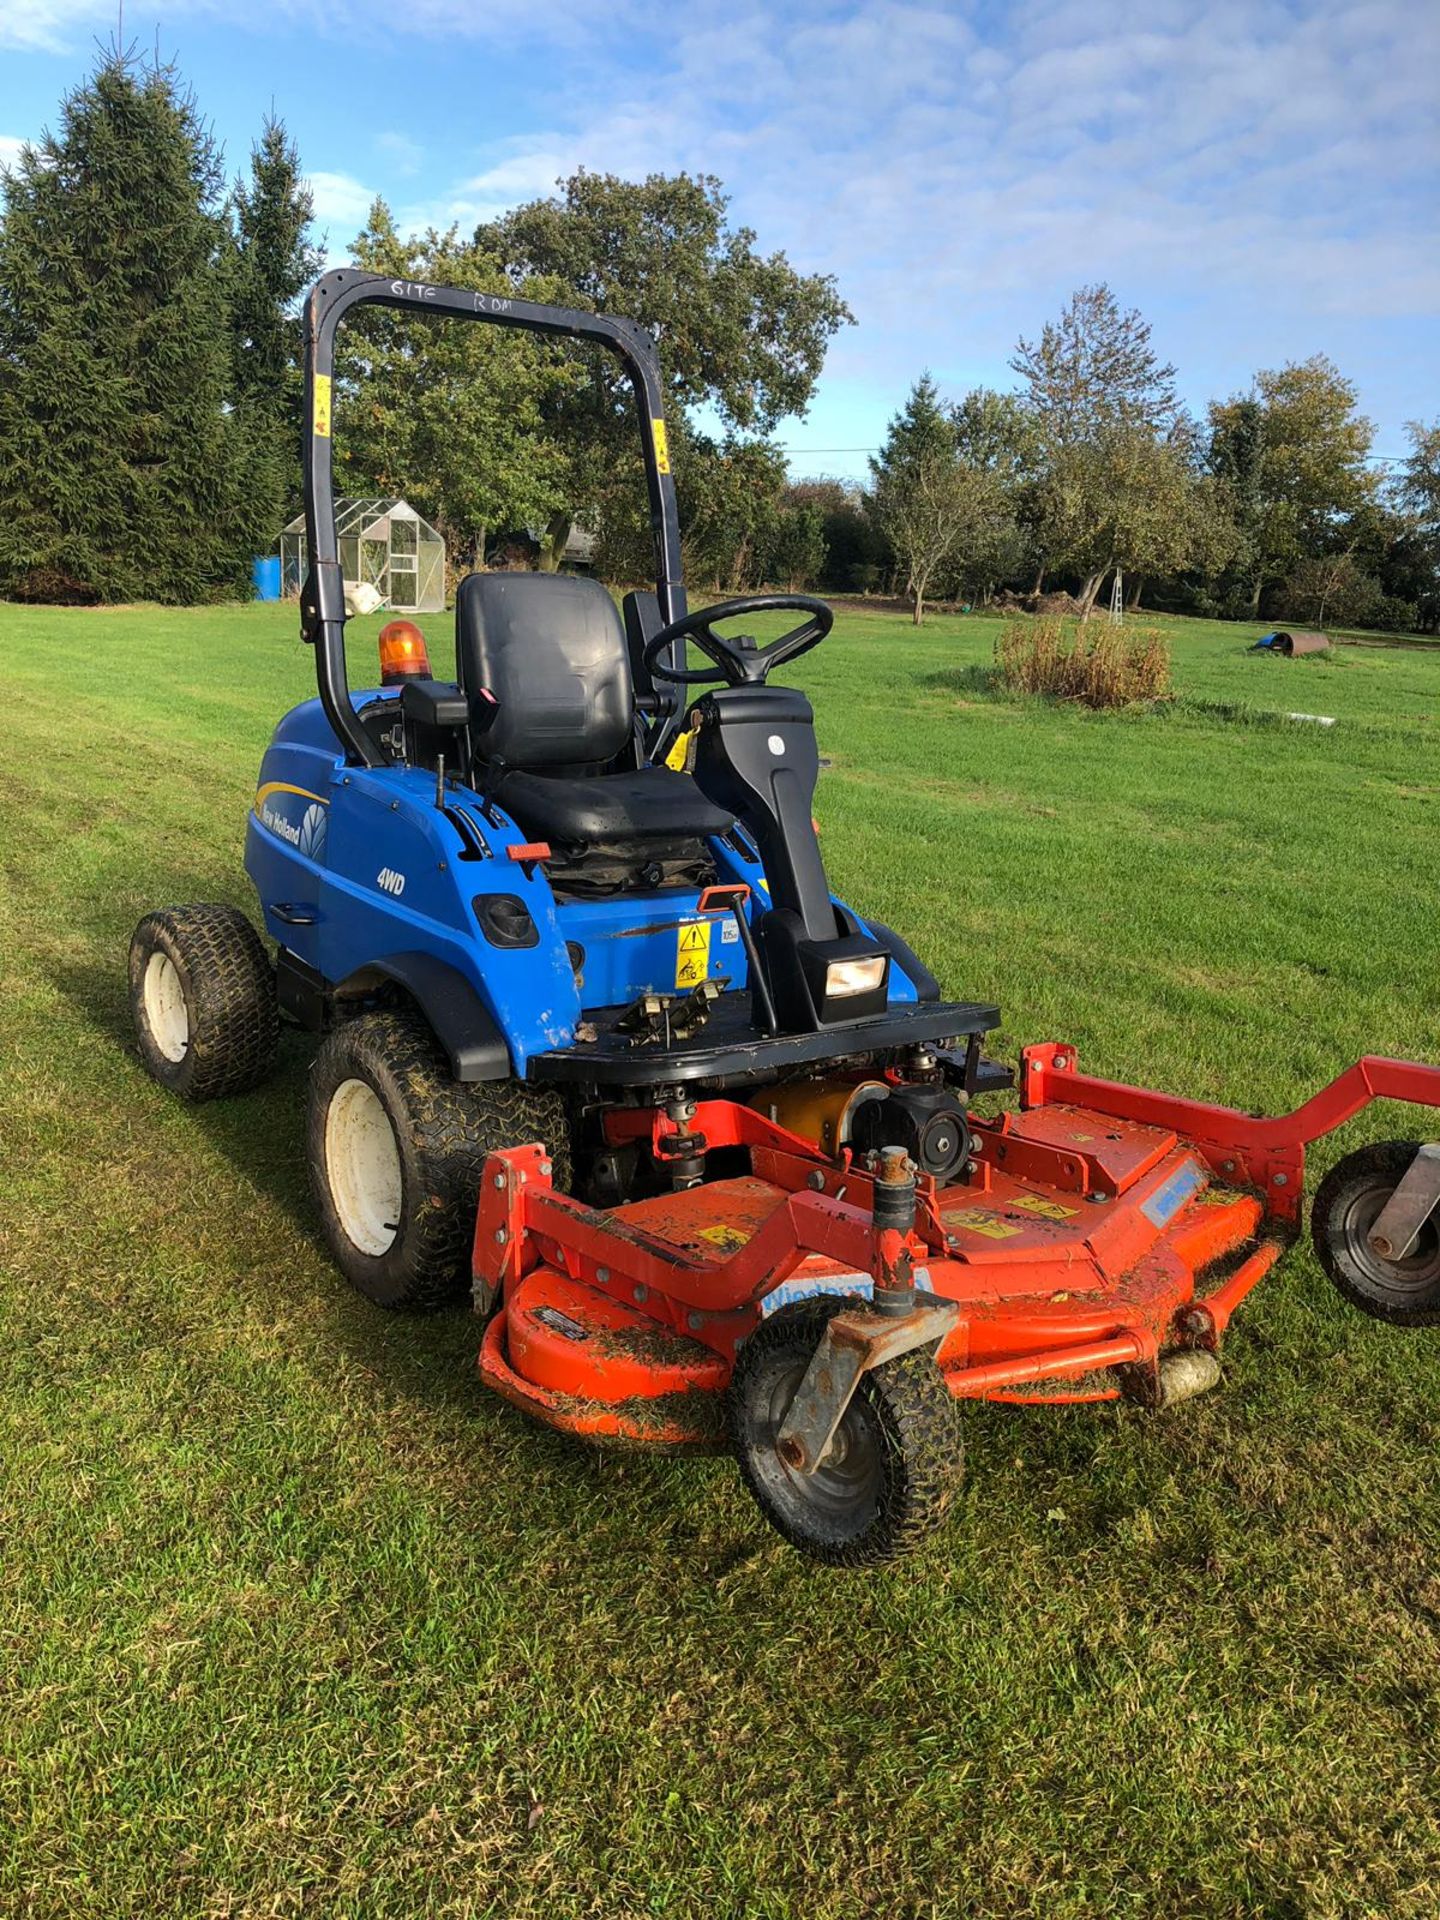 2010/60 REG NEW HOLLAND MC35 4WD RIDE ON LAWN MOWER LOW HOURS *PLUS VAT* - Image 3 of 21